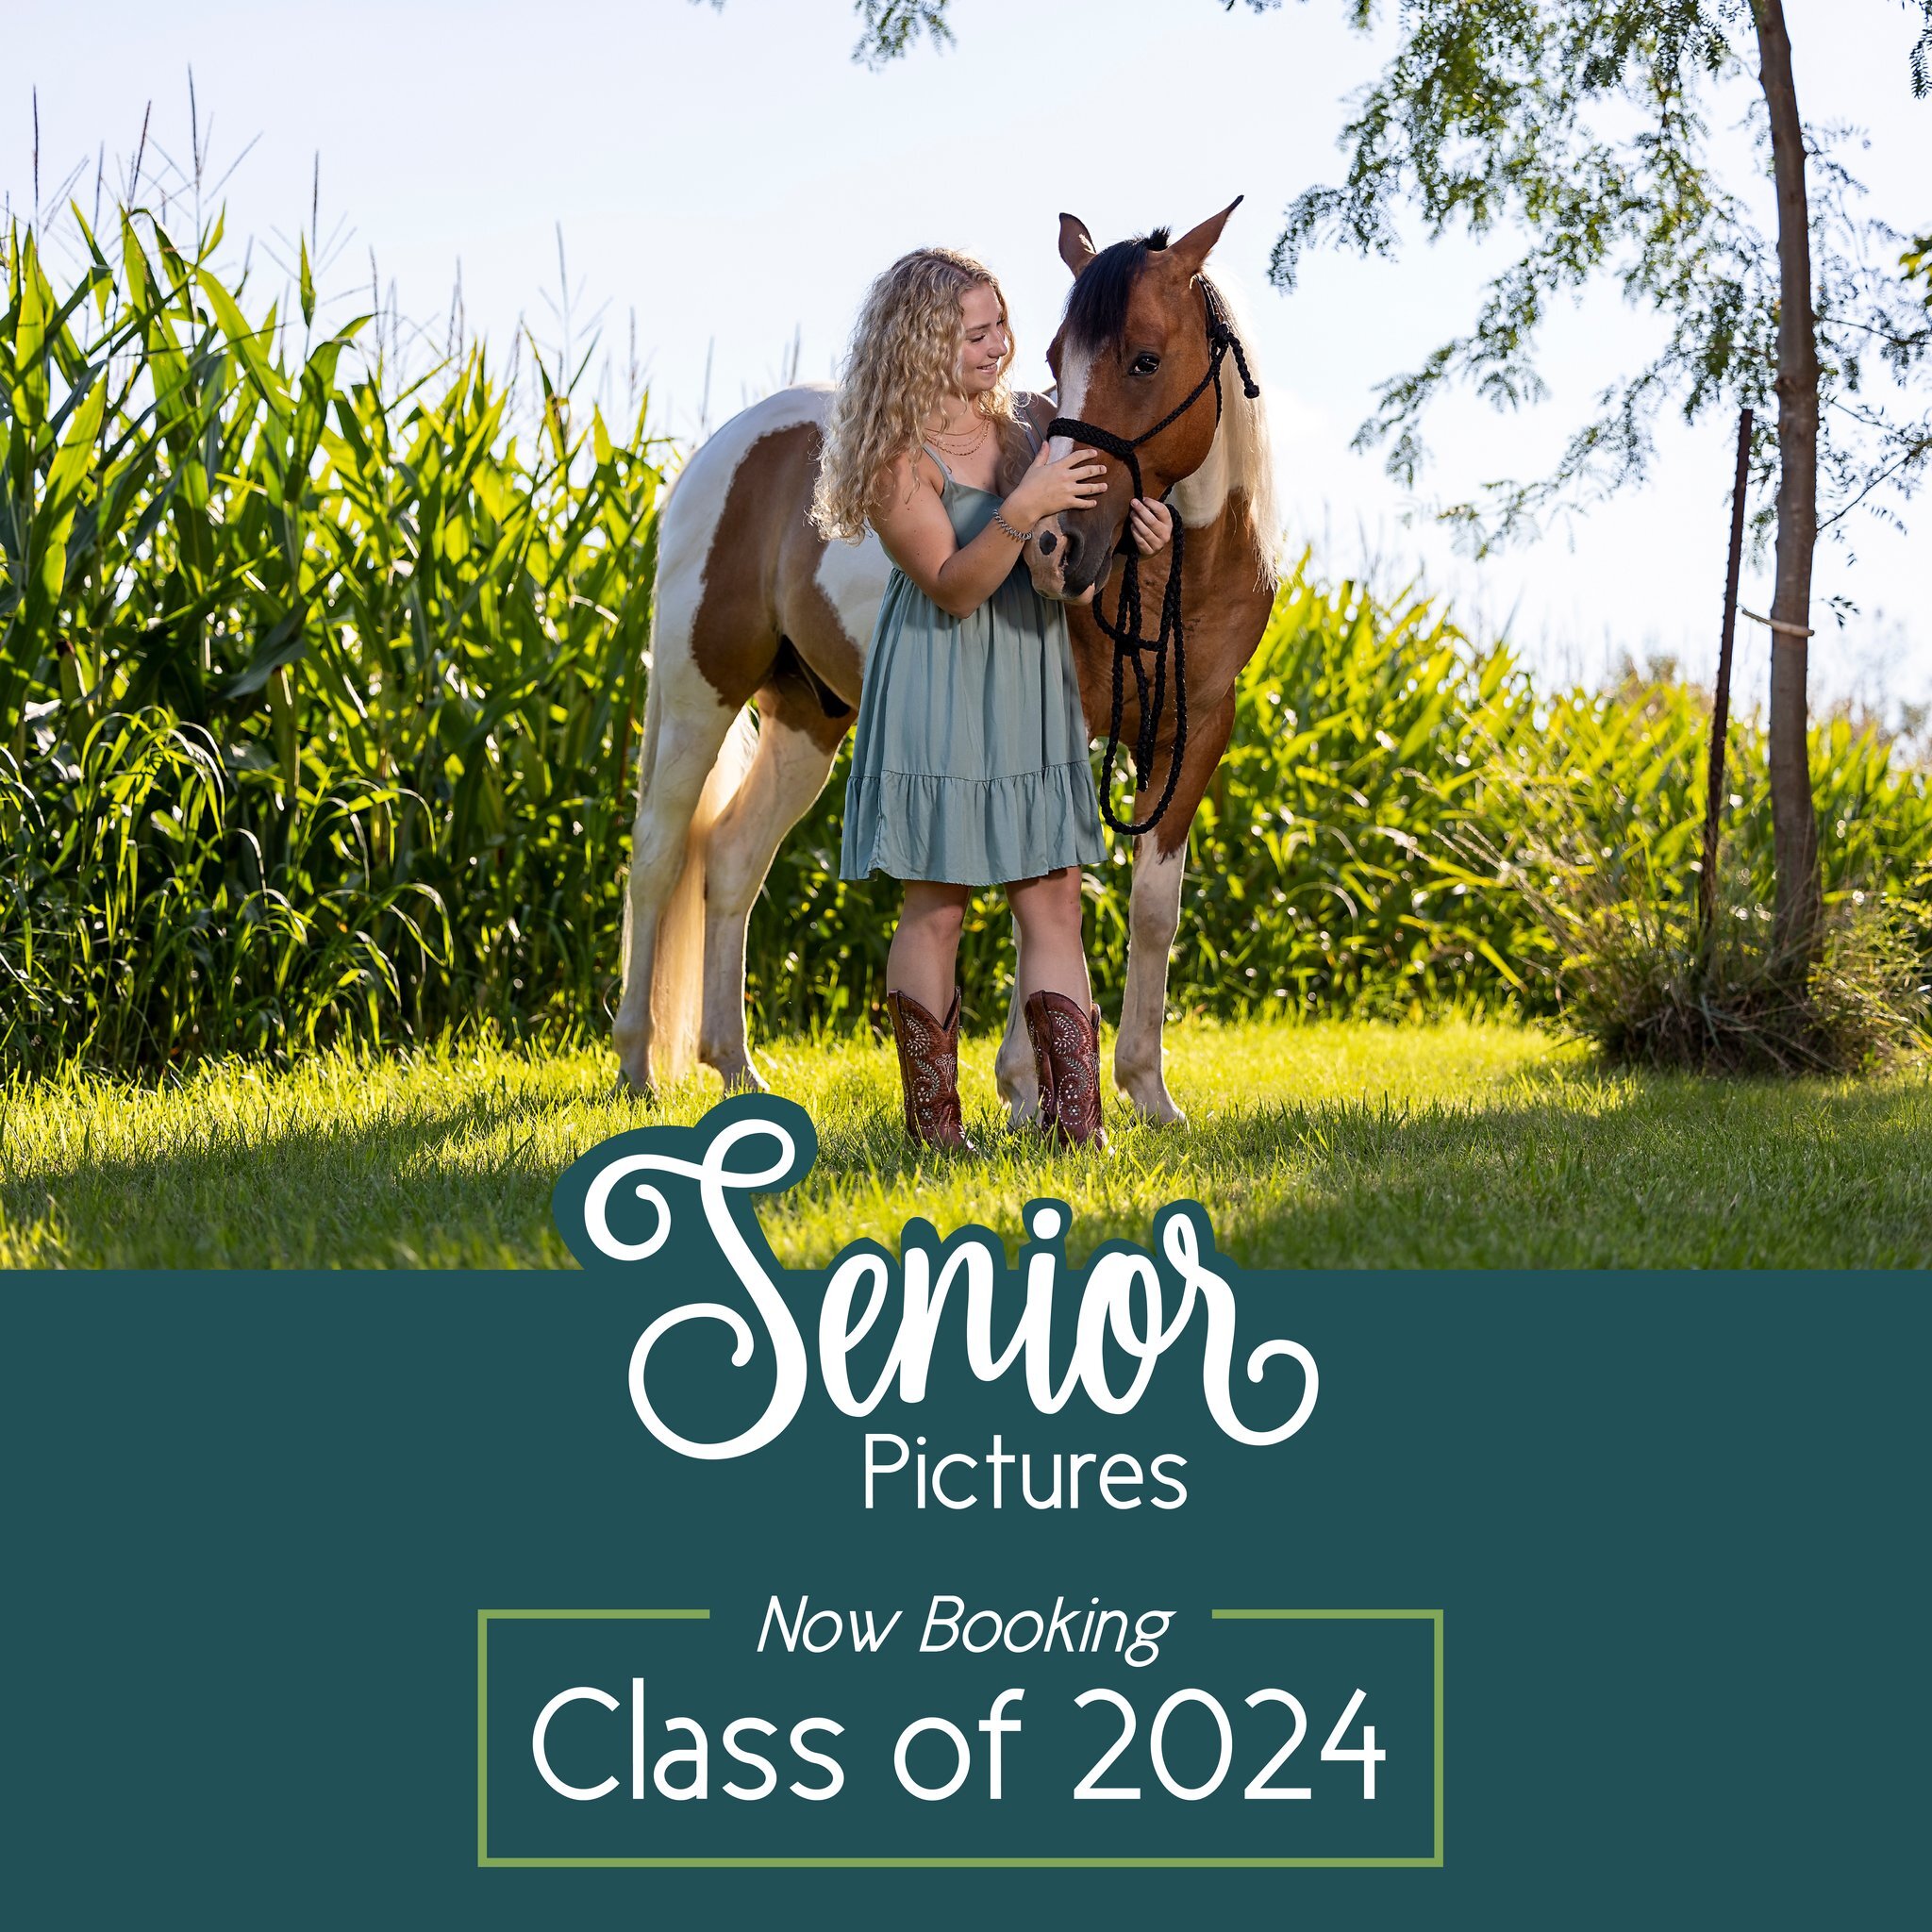 I love helping seniors feel confident and beautiful in front of the camera 🌸 Let's create magic together! #seniorphotographer #classof2024 
Details and booking here: https://book.usesession.com/i/KMPL6DM42/session-type/98274